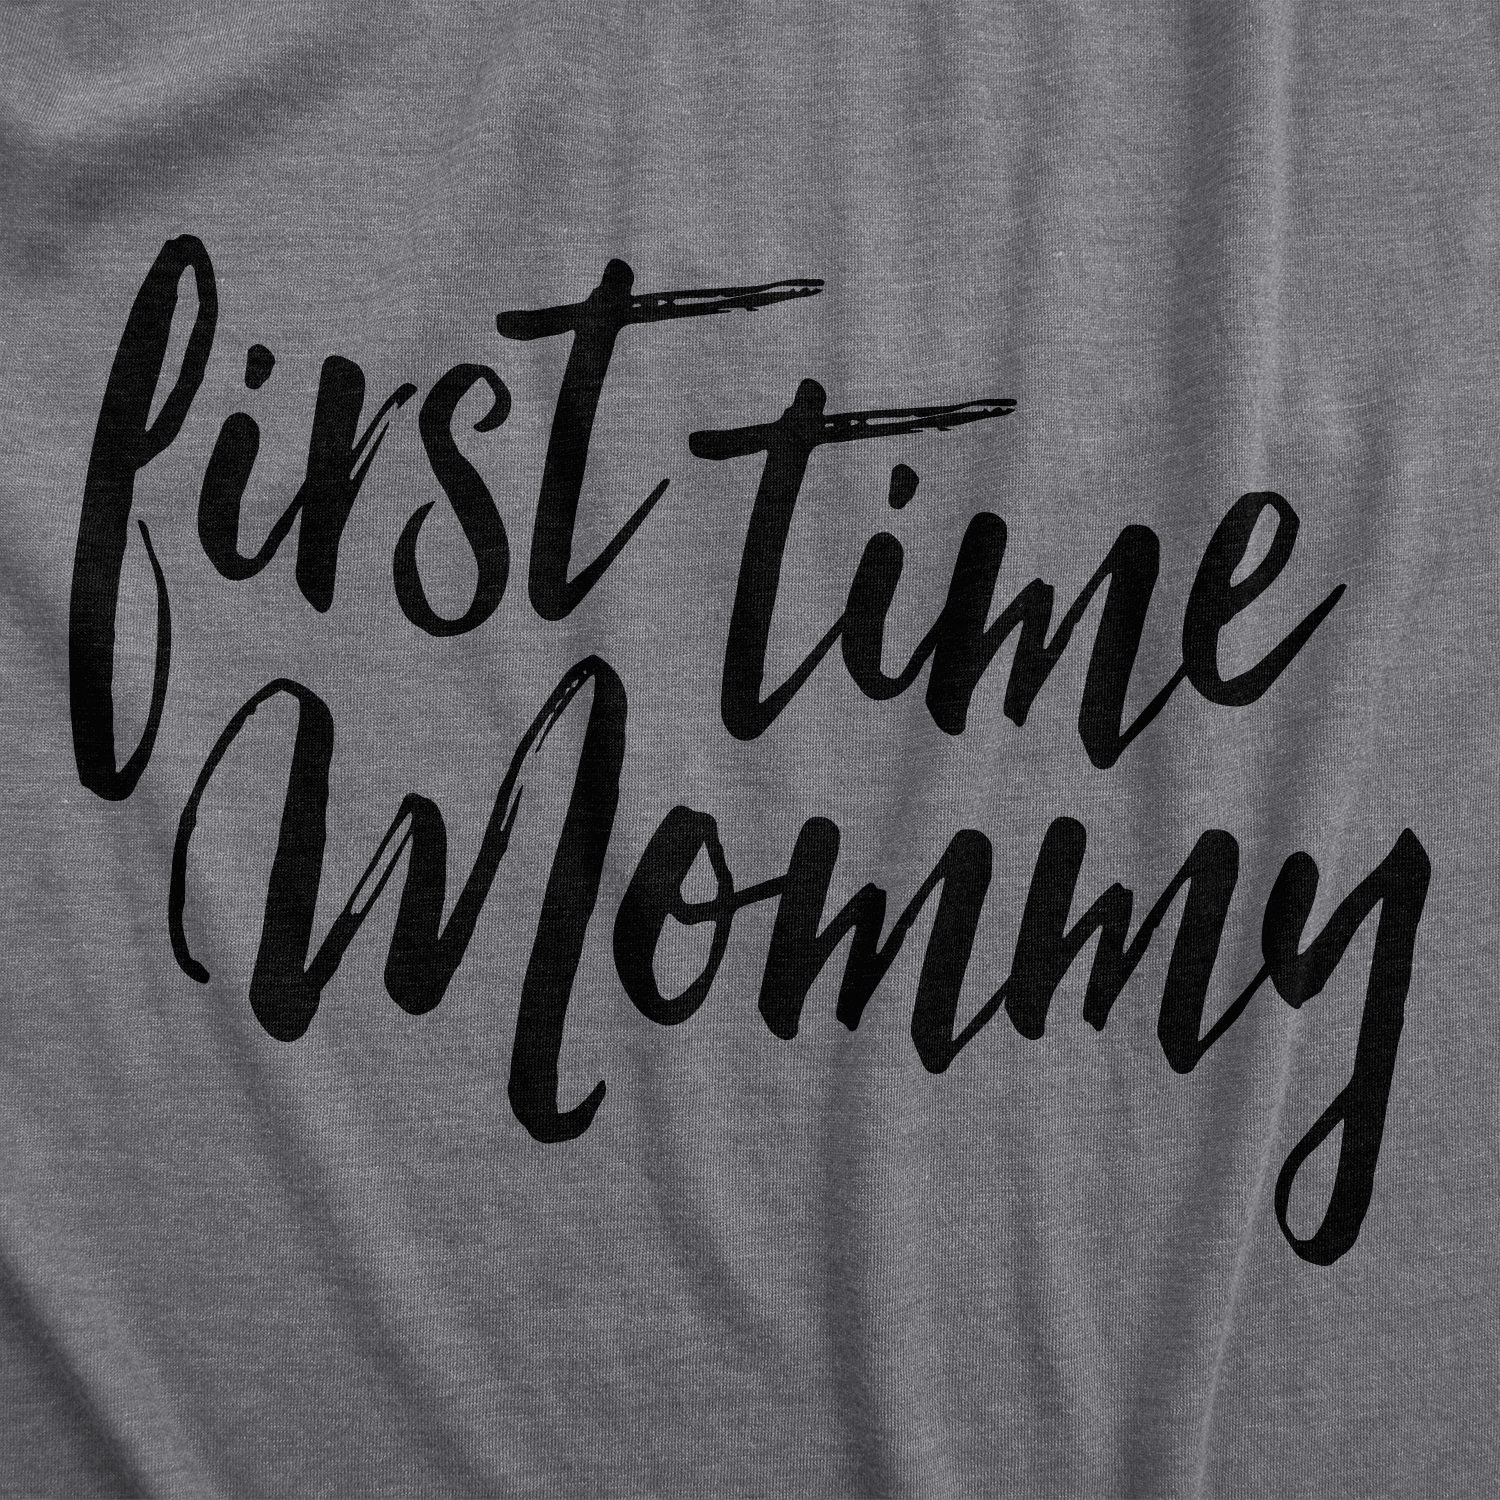 Funny Dark Heather Grey First Time Mommy Maternity T Shirt Nerdy Mother's Day Tee